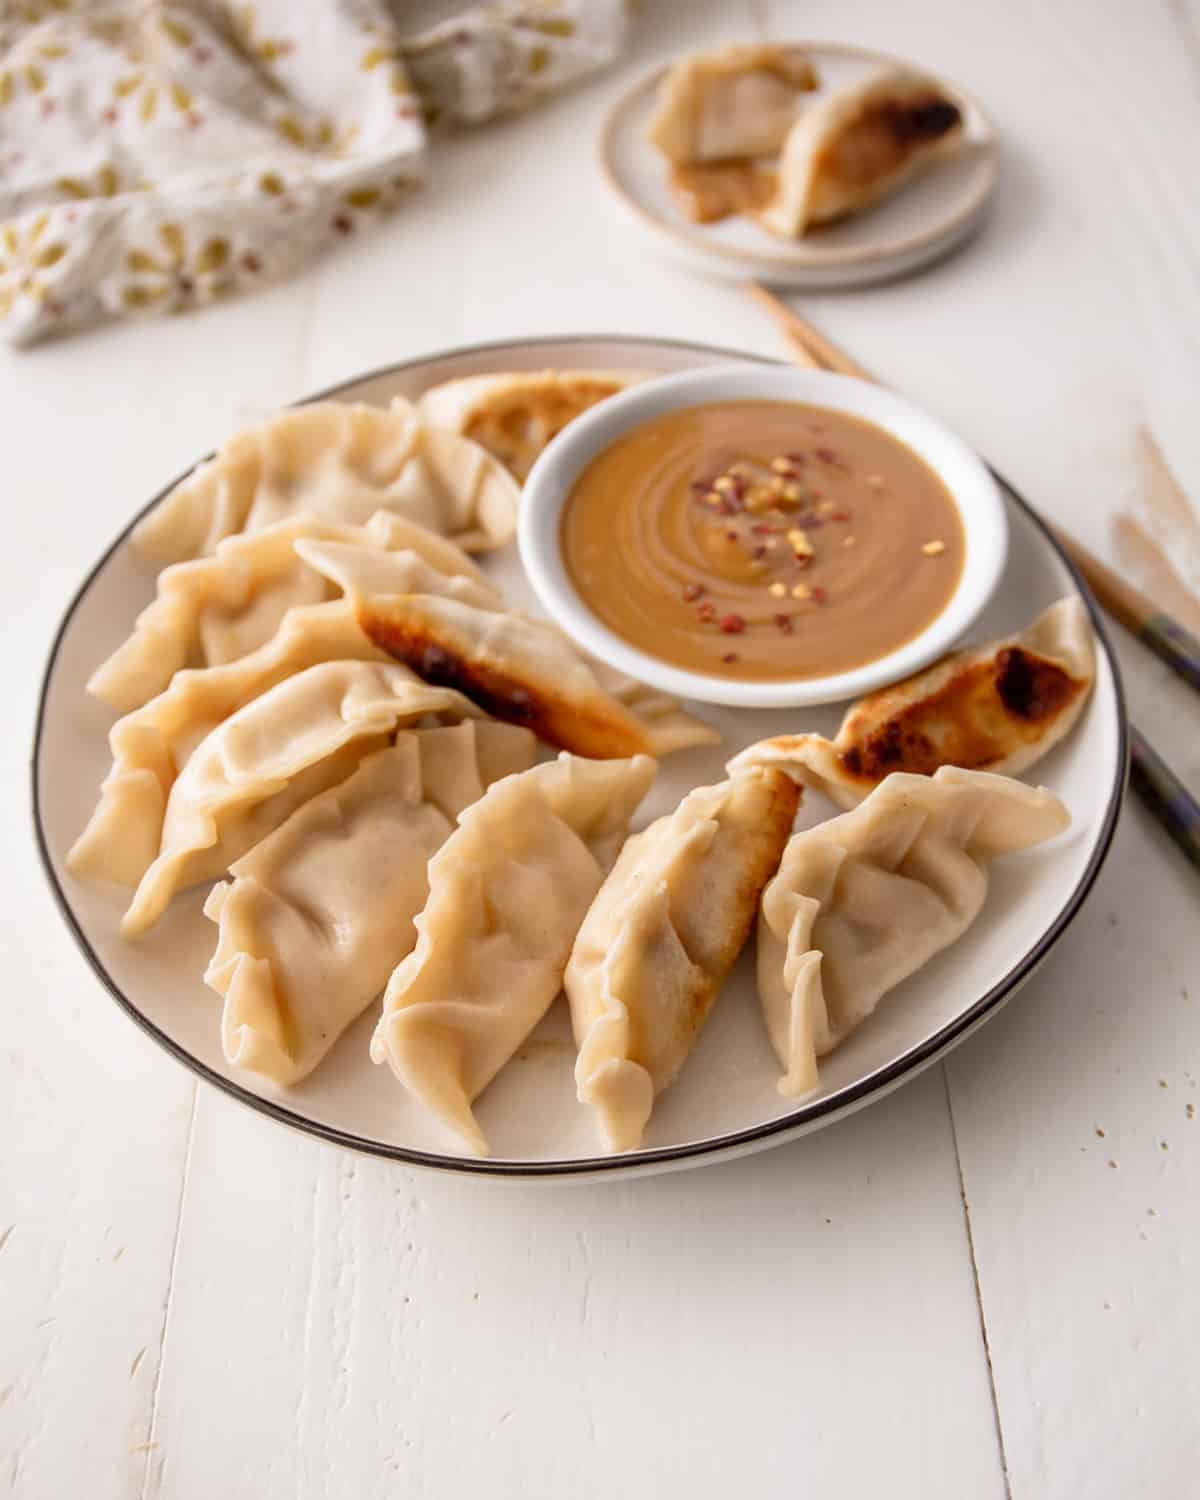 dumplings and dipping sauce on a white plate